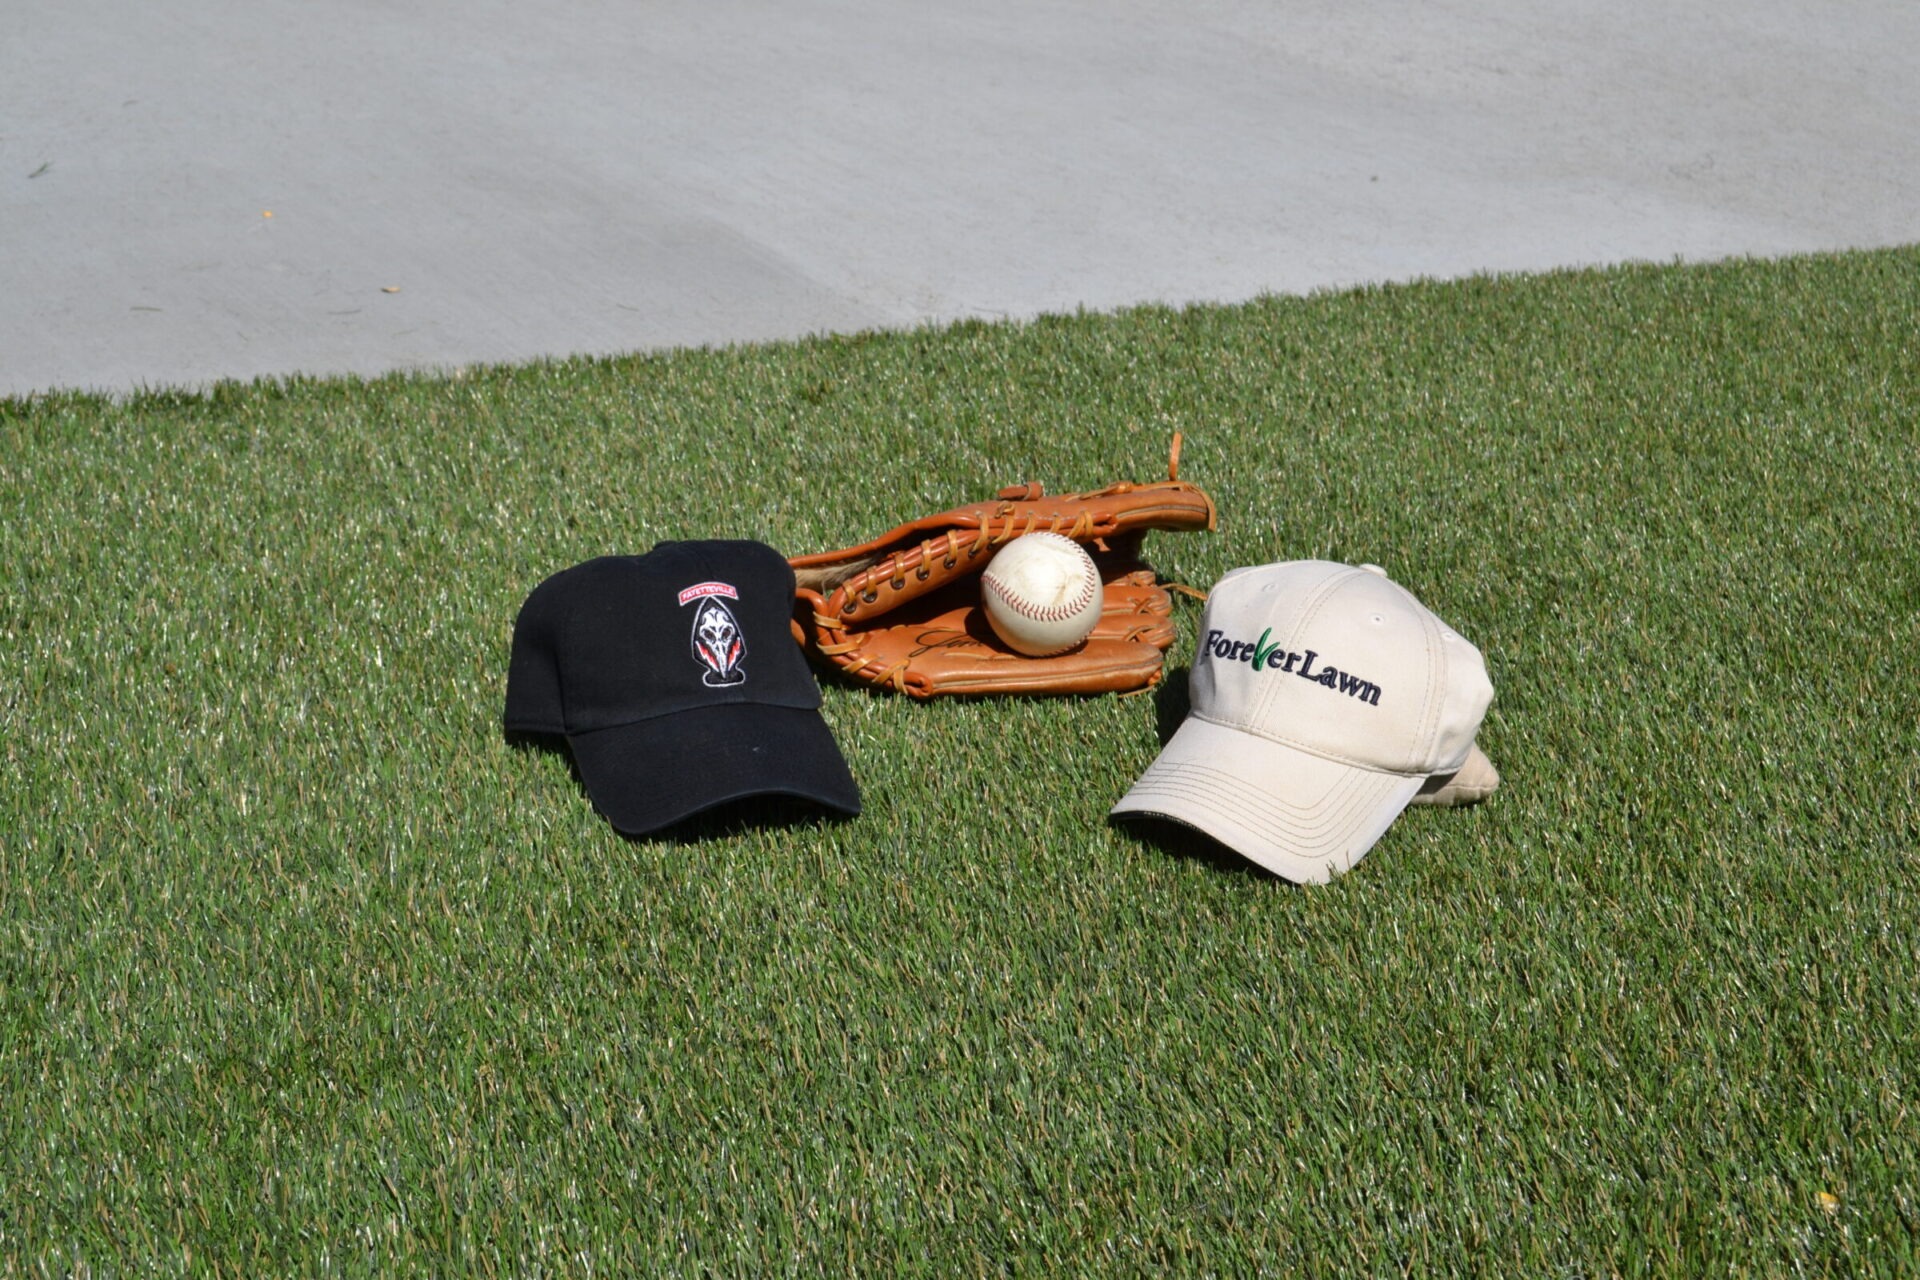 Two baseball caps, a glove, and a ball are arranged on grass, suggesting recreational or sports activity, possibly related to baseball.